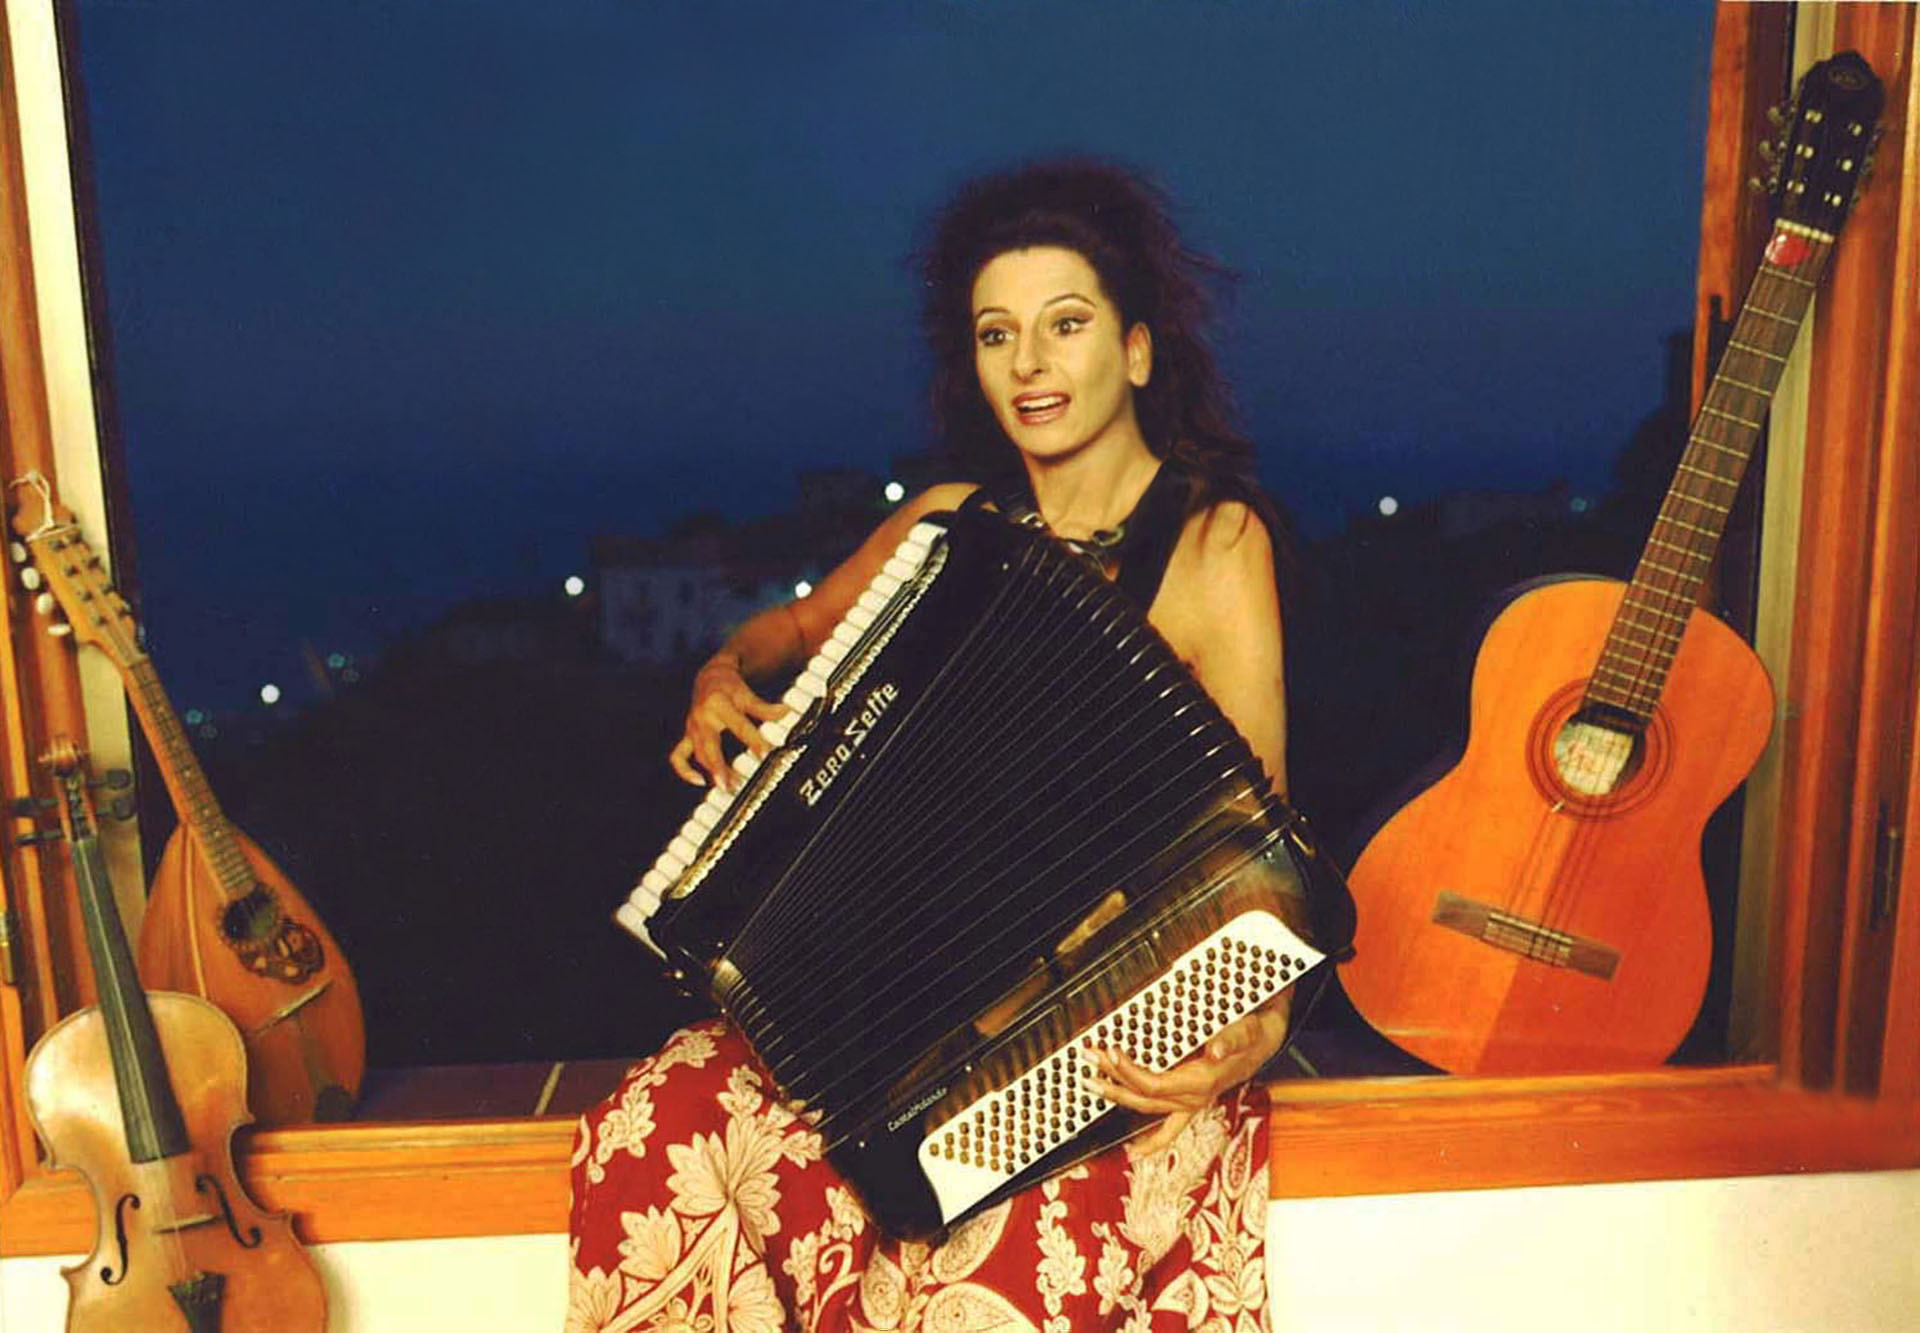 Lucia Aliberti⚘Plays the Accordion of her Grandfather Enrico⚘Villa Bellini⚘Savoca⚘Sicily⚘Photo Shooting⚘Photo taken from the Newspaper⚘:http://www.luciaaliberti.it #luciaaliberti #accordion #villabellini #savoca #sicily #mandolin #photoshooting